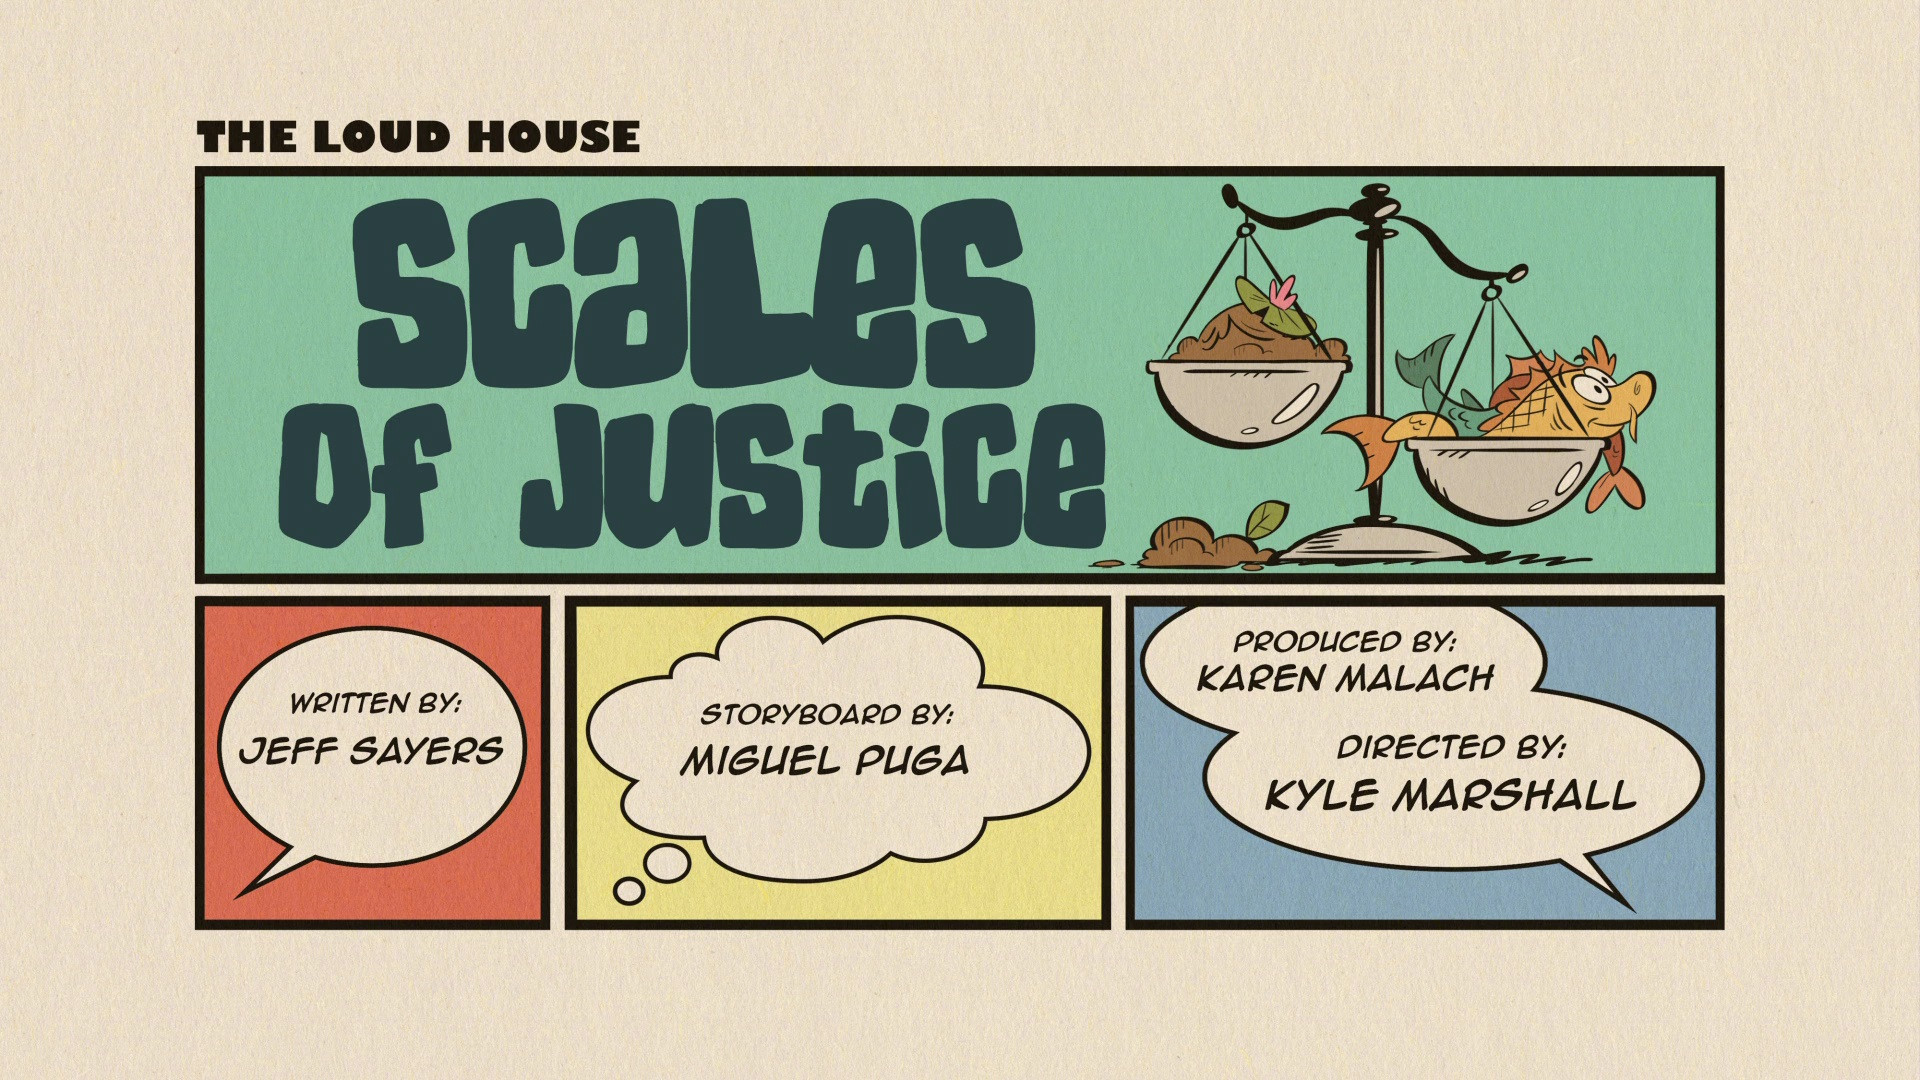 1920x1080 "Scales of Justice"